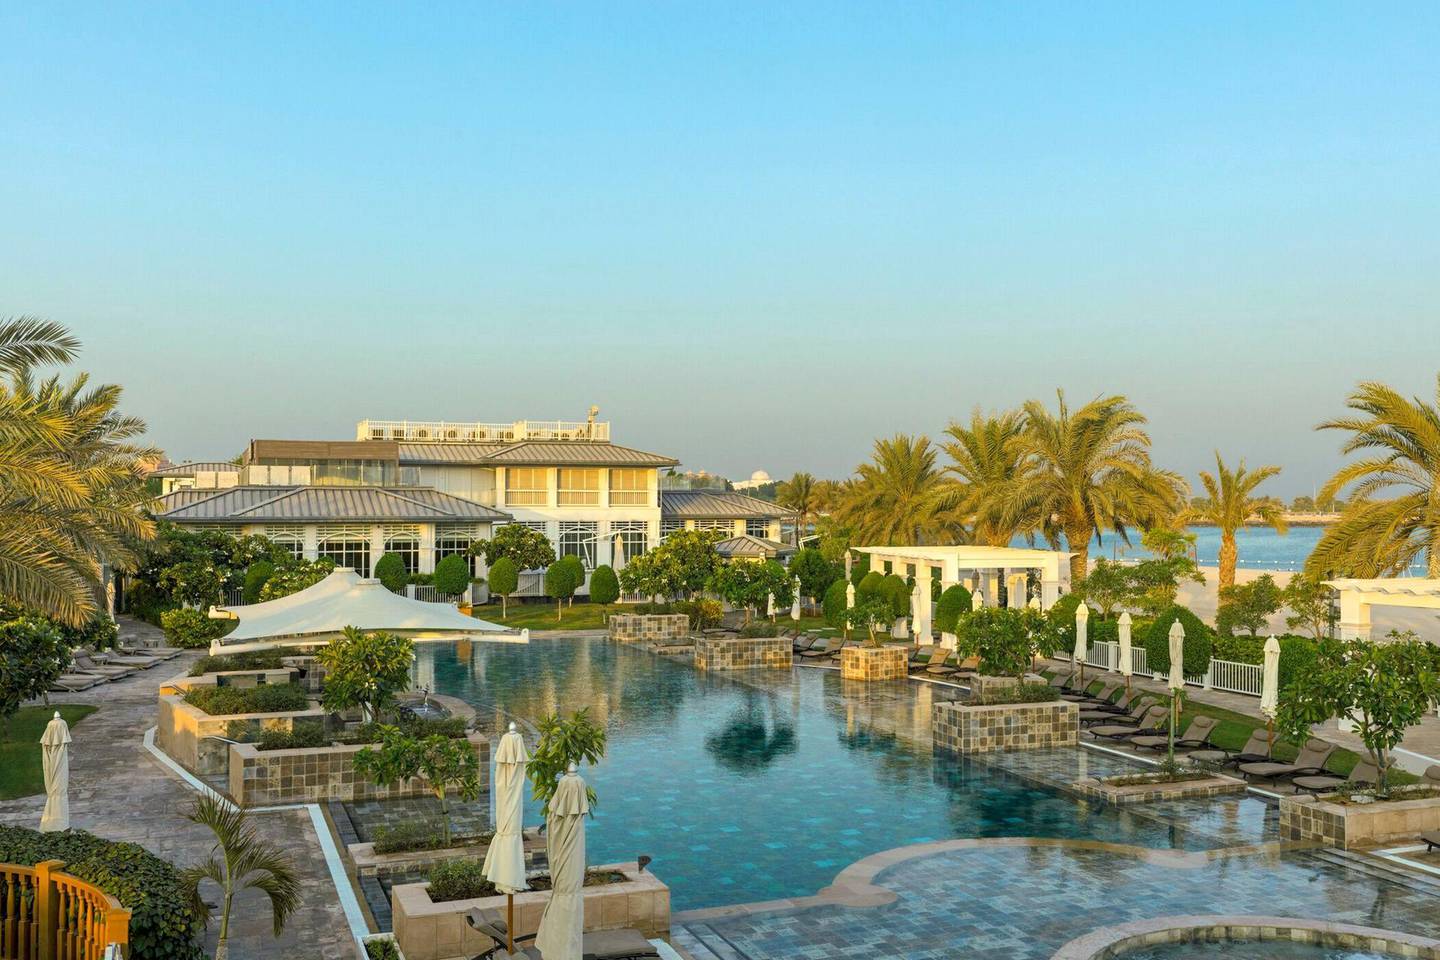 Nation Riviera Beach Club is a haven amid the hustle and bustle of city life. Courtesy The St Regis Abu Dhabi